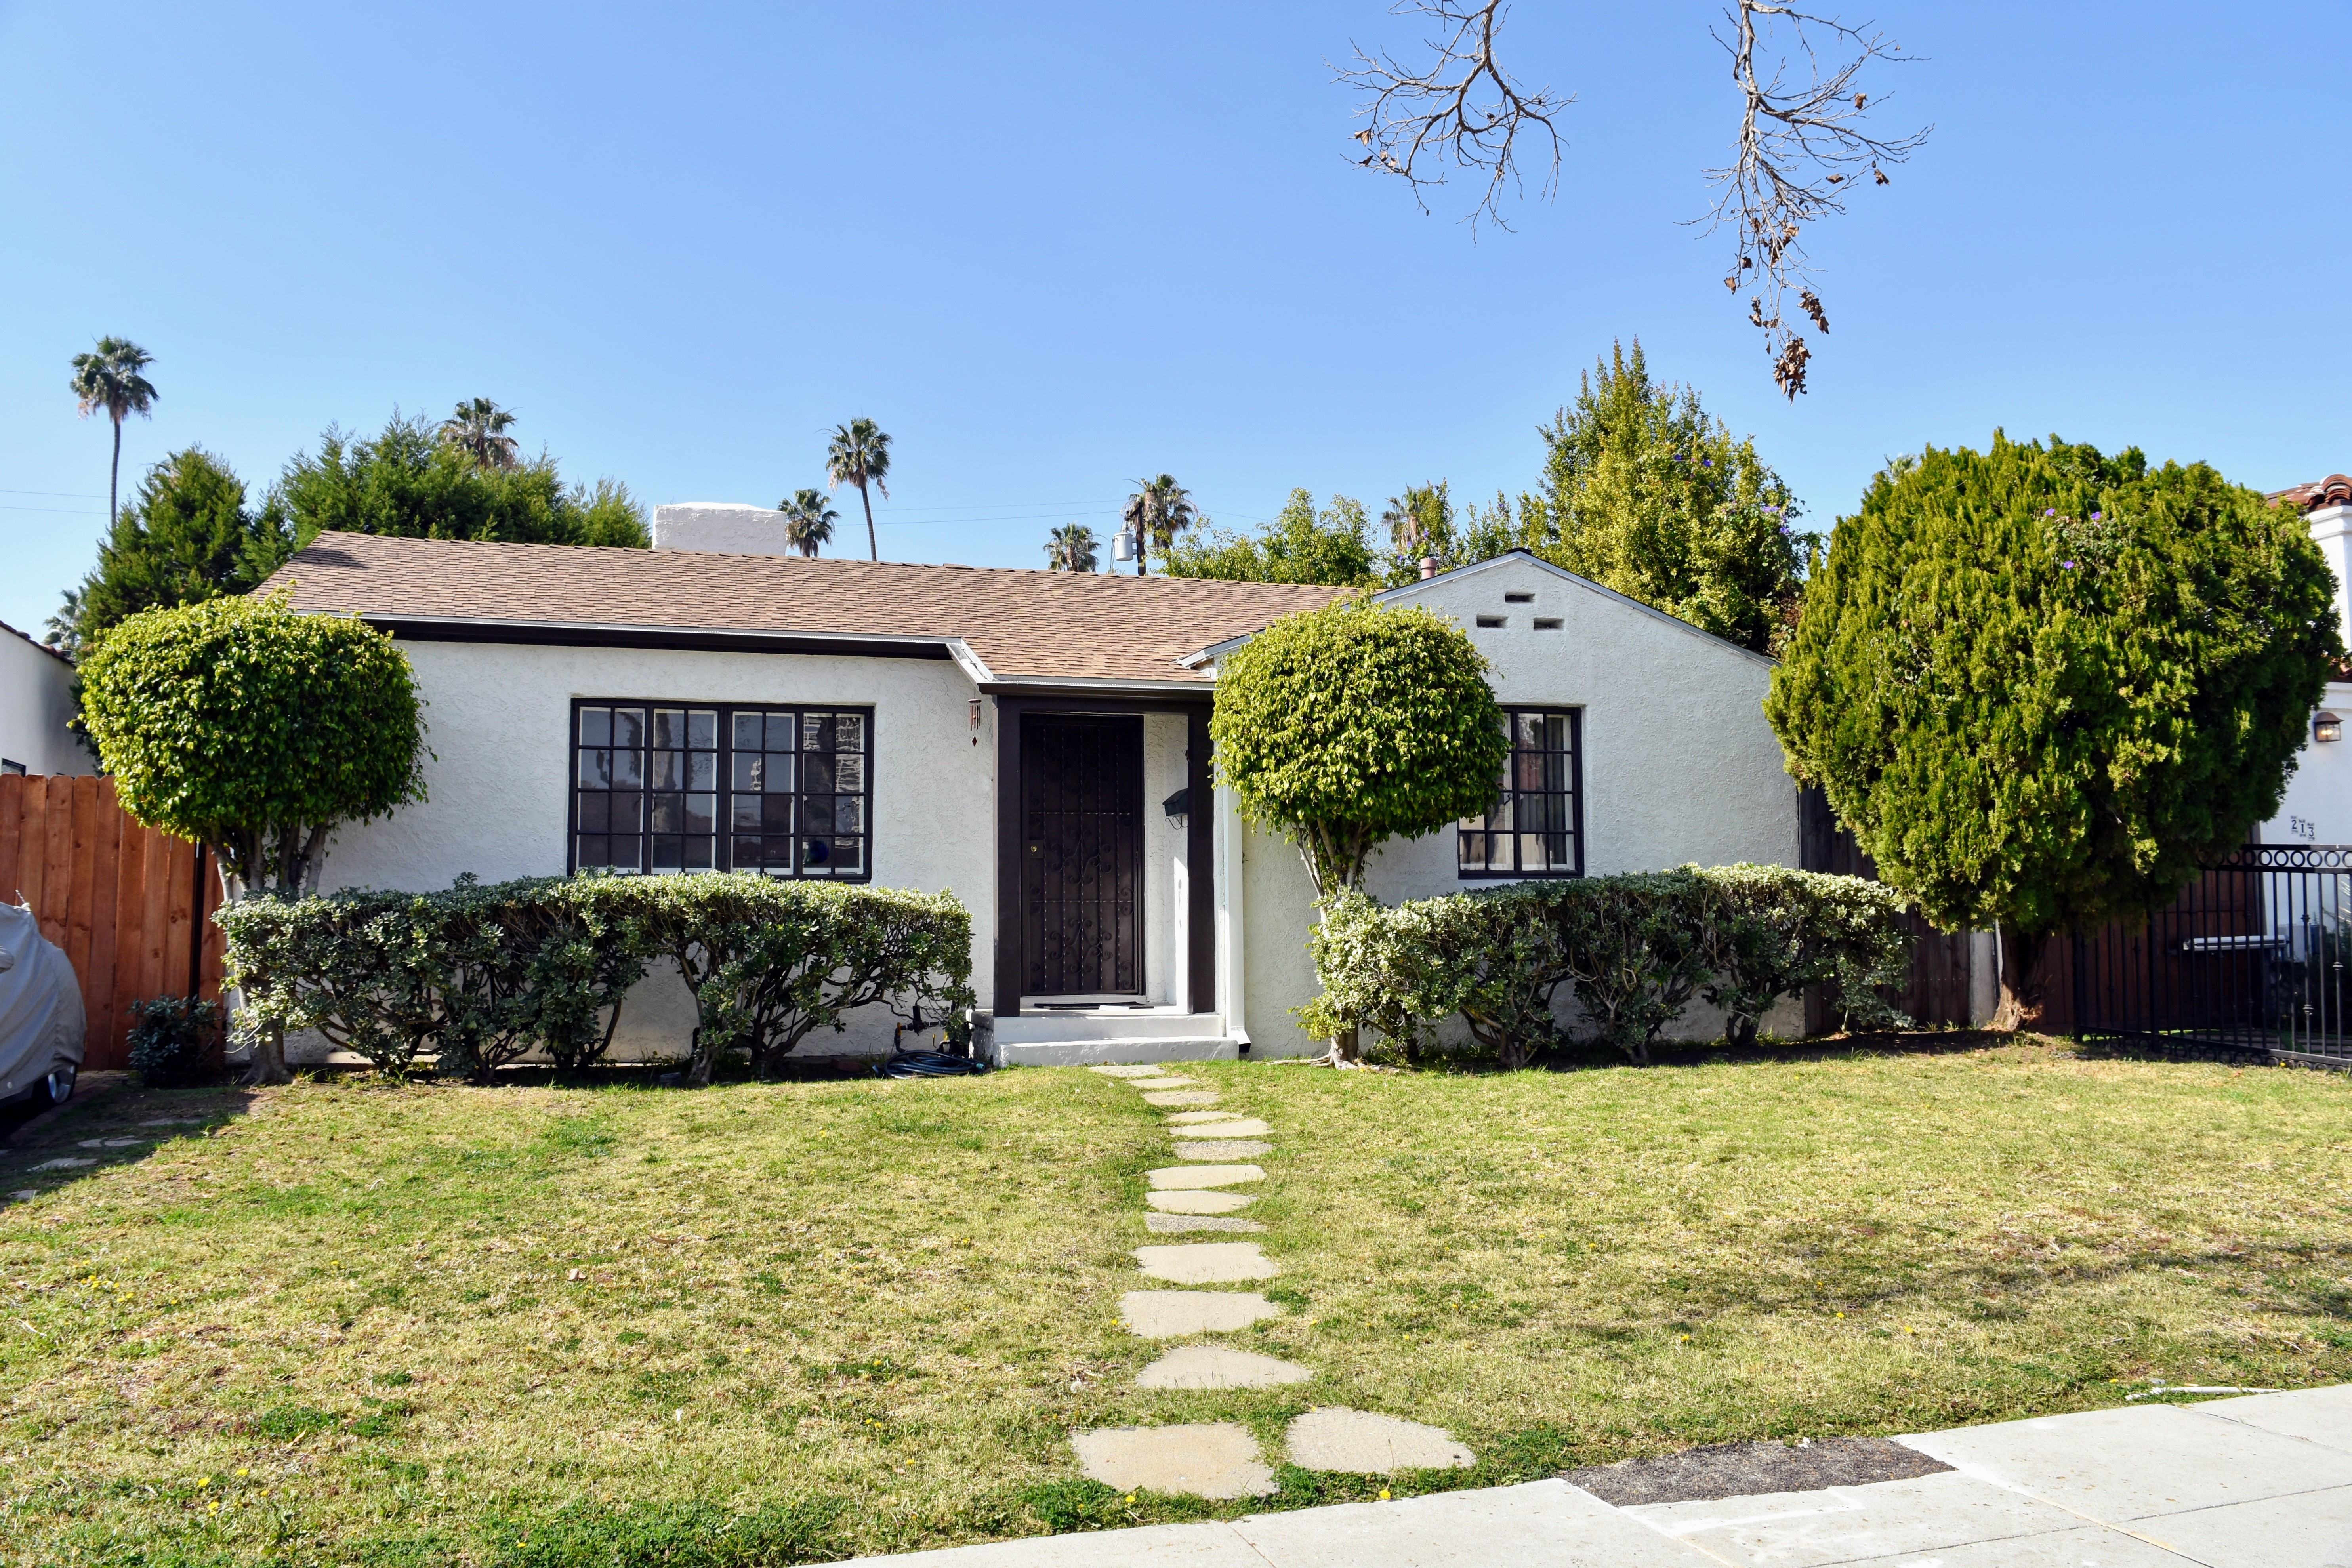 Single-family home in Los Angeles